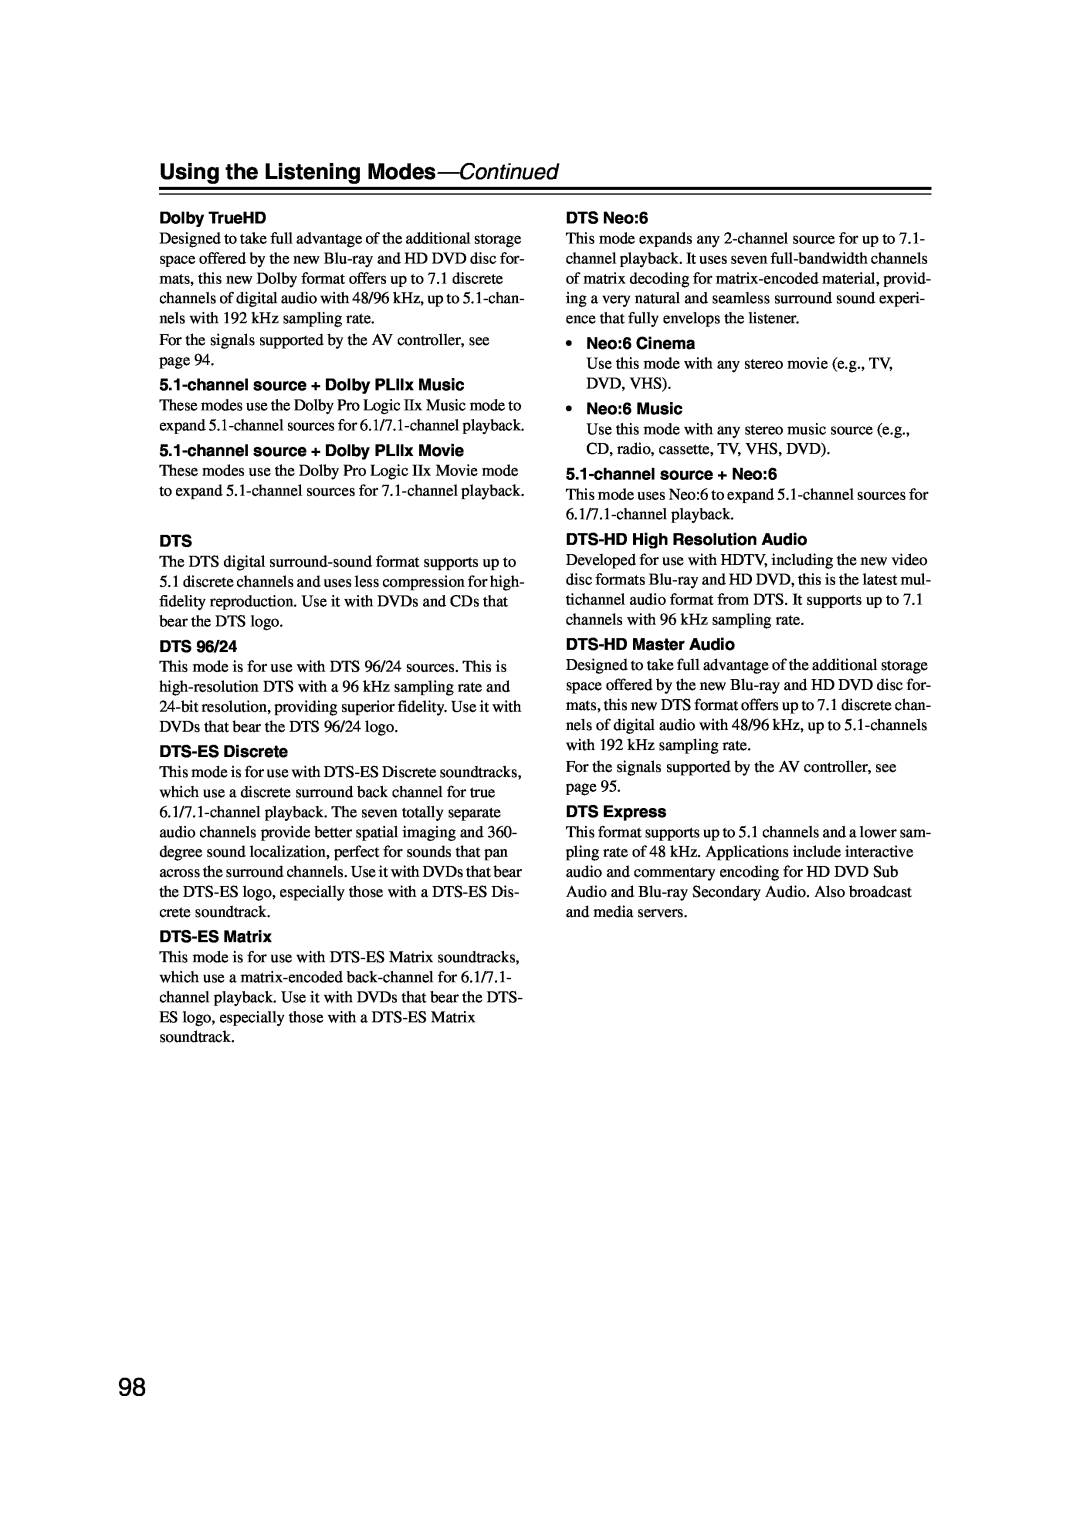 Integra DHC-9.9 instruction manual Using the Listening Modes—Continued, Dolby TrueHD 